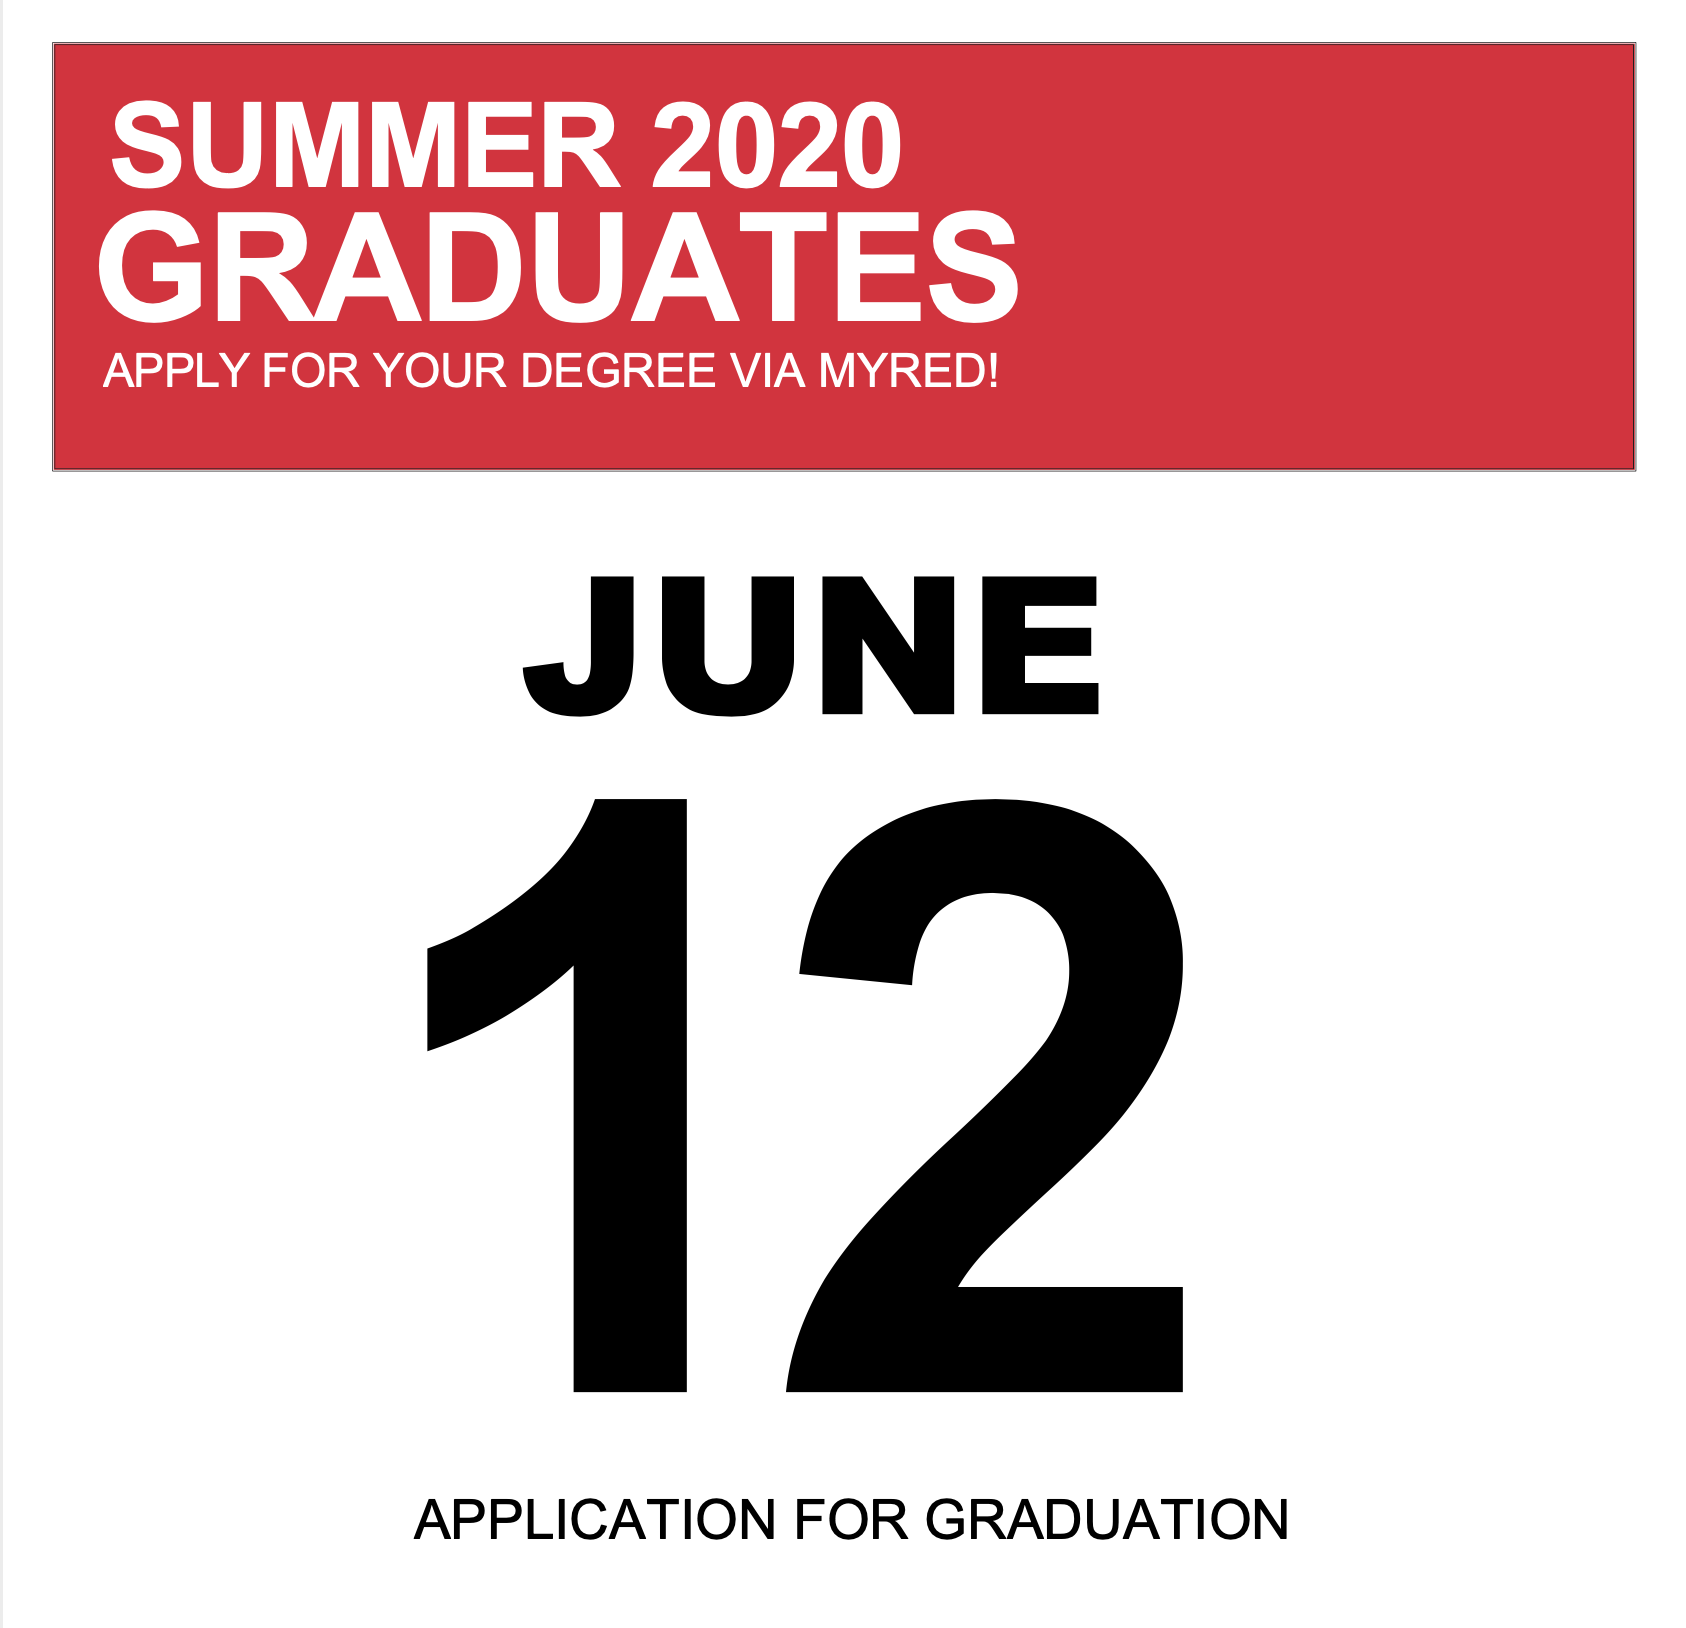 The deadline to submit your application for summer graduation is June 12. Apply for your degree via MyRED.